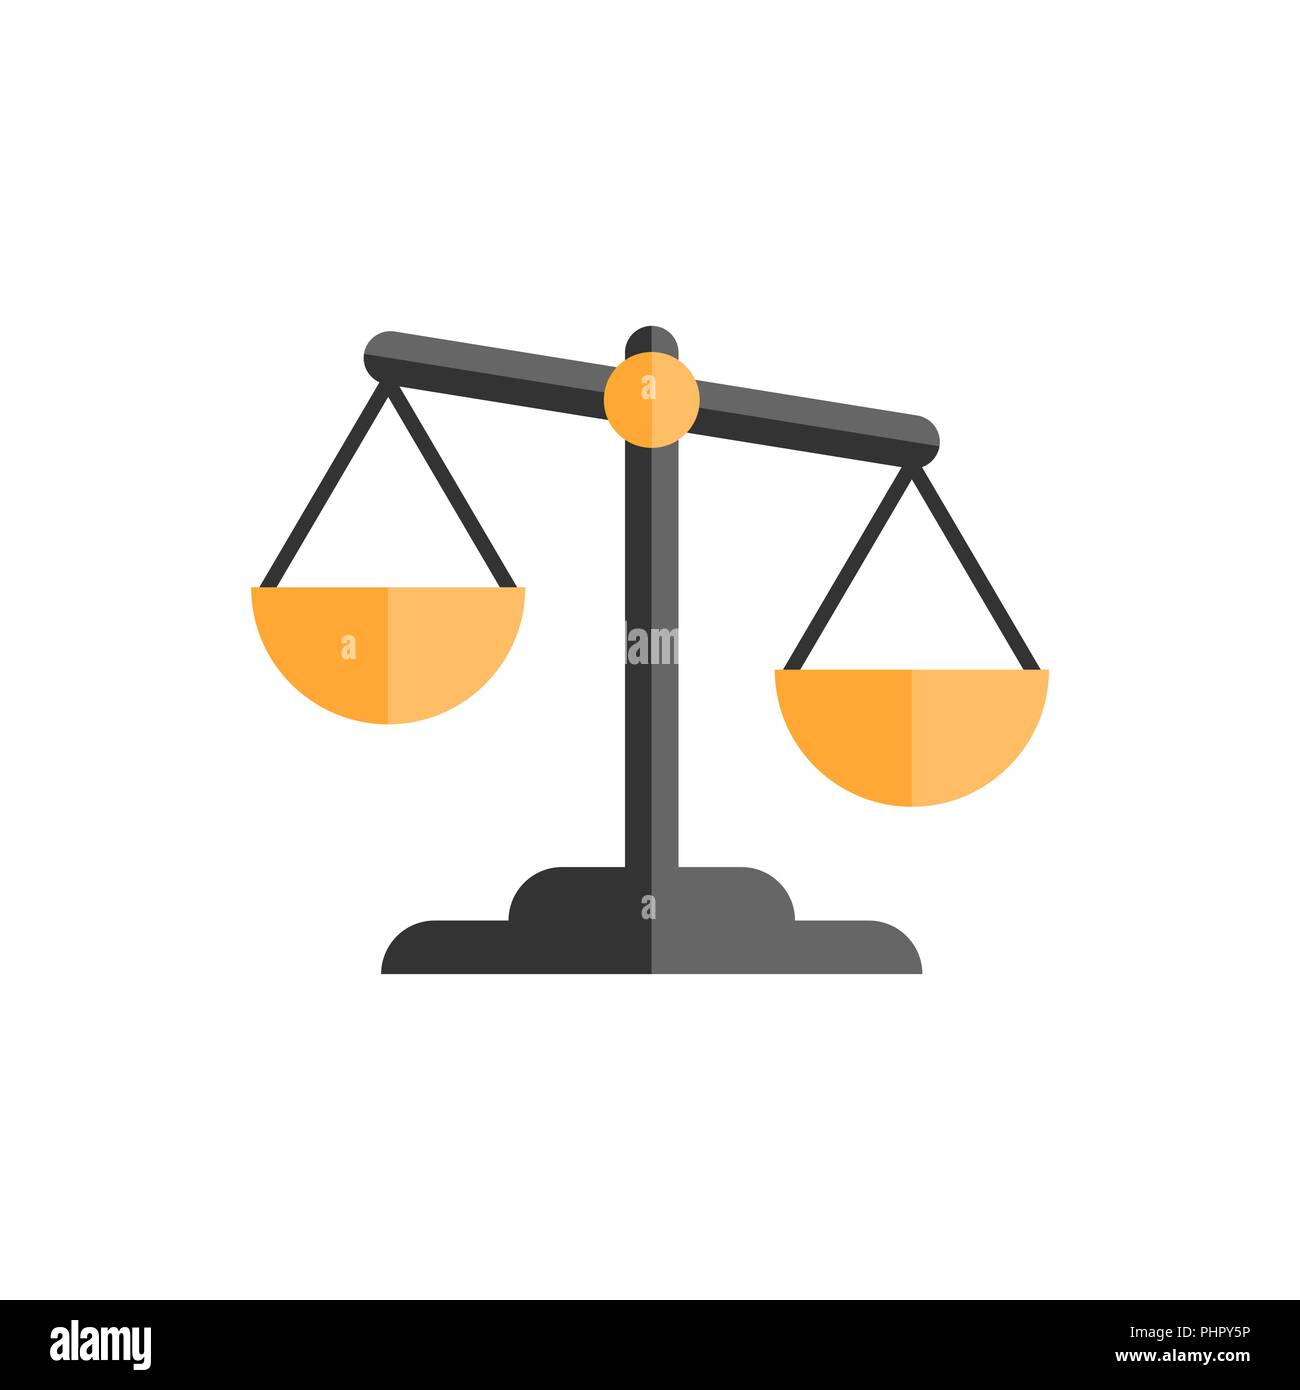 Gold weight scale icon Royalty Free Vector Image